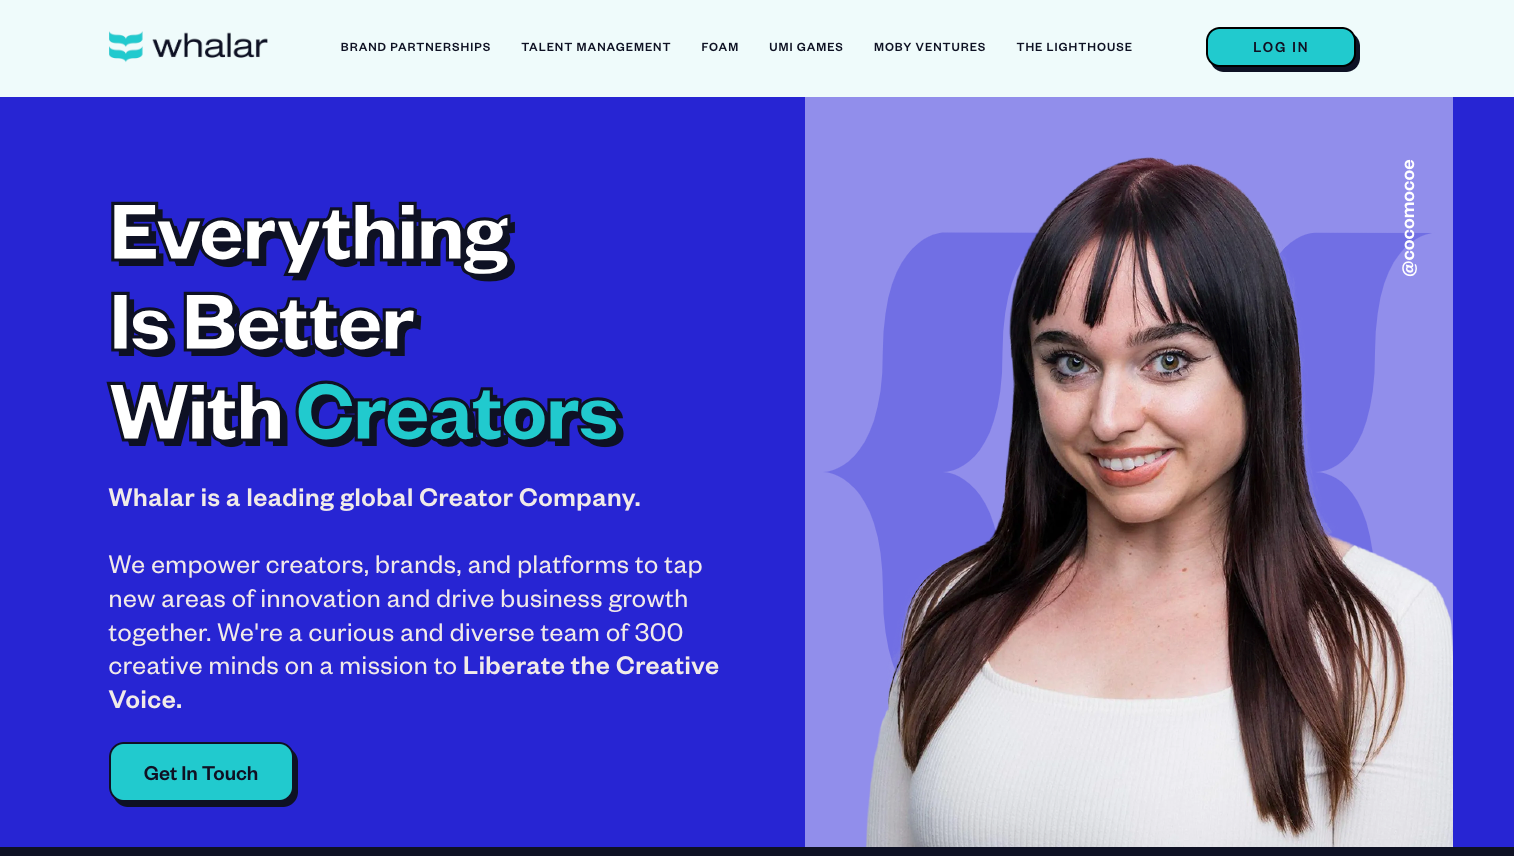 Whalar page features an advertising blurb, get-in-touch button, and image of a young woman.